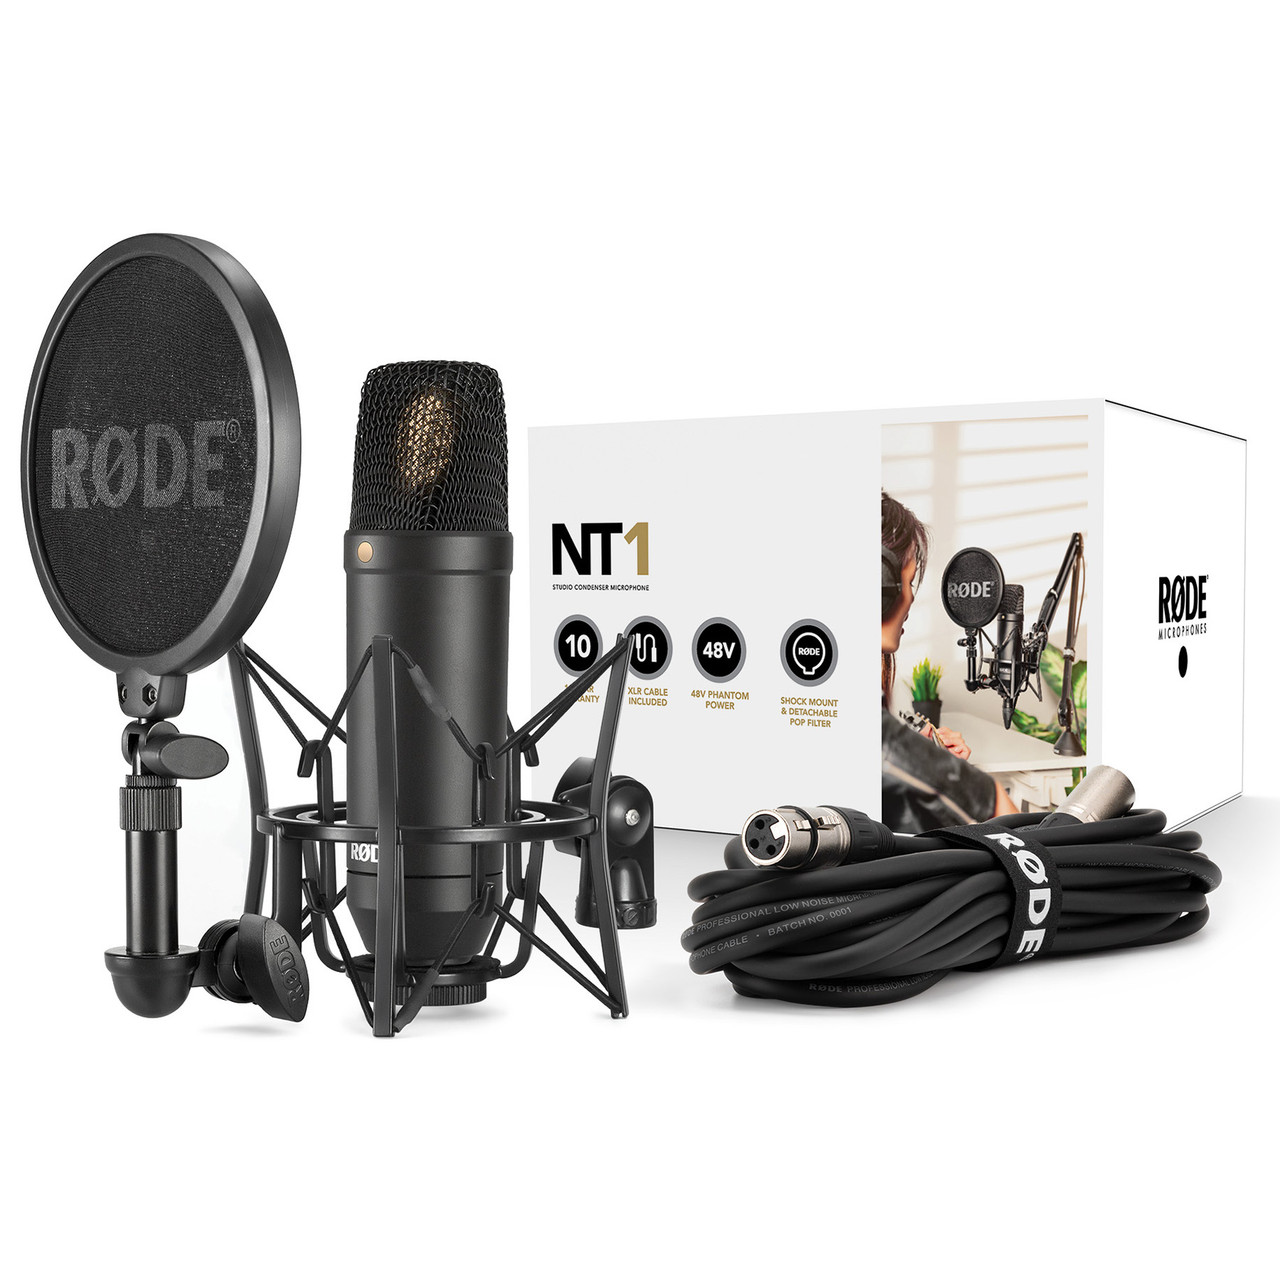 Rode NT1 KIT Complete Recording Microphone Kit with XLR Cable and Stand